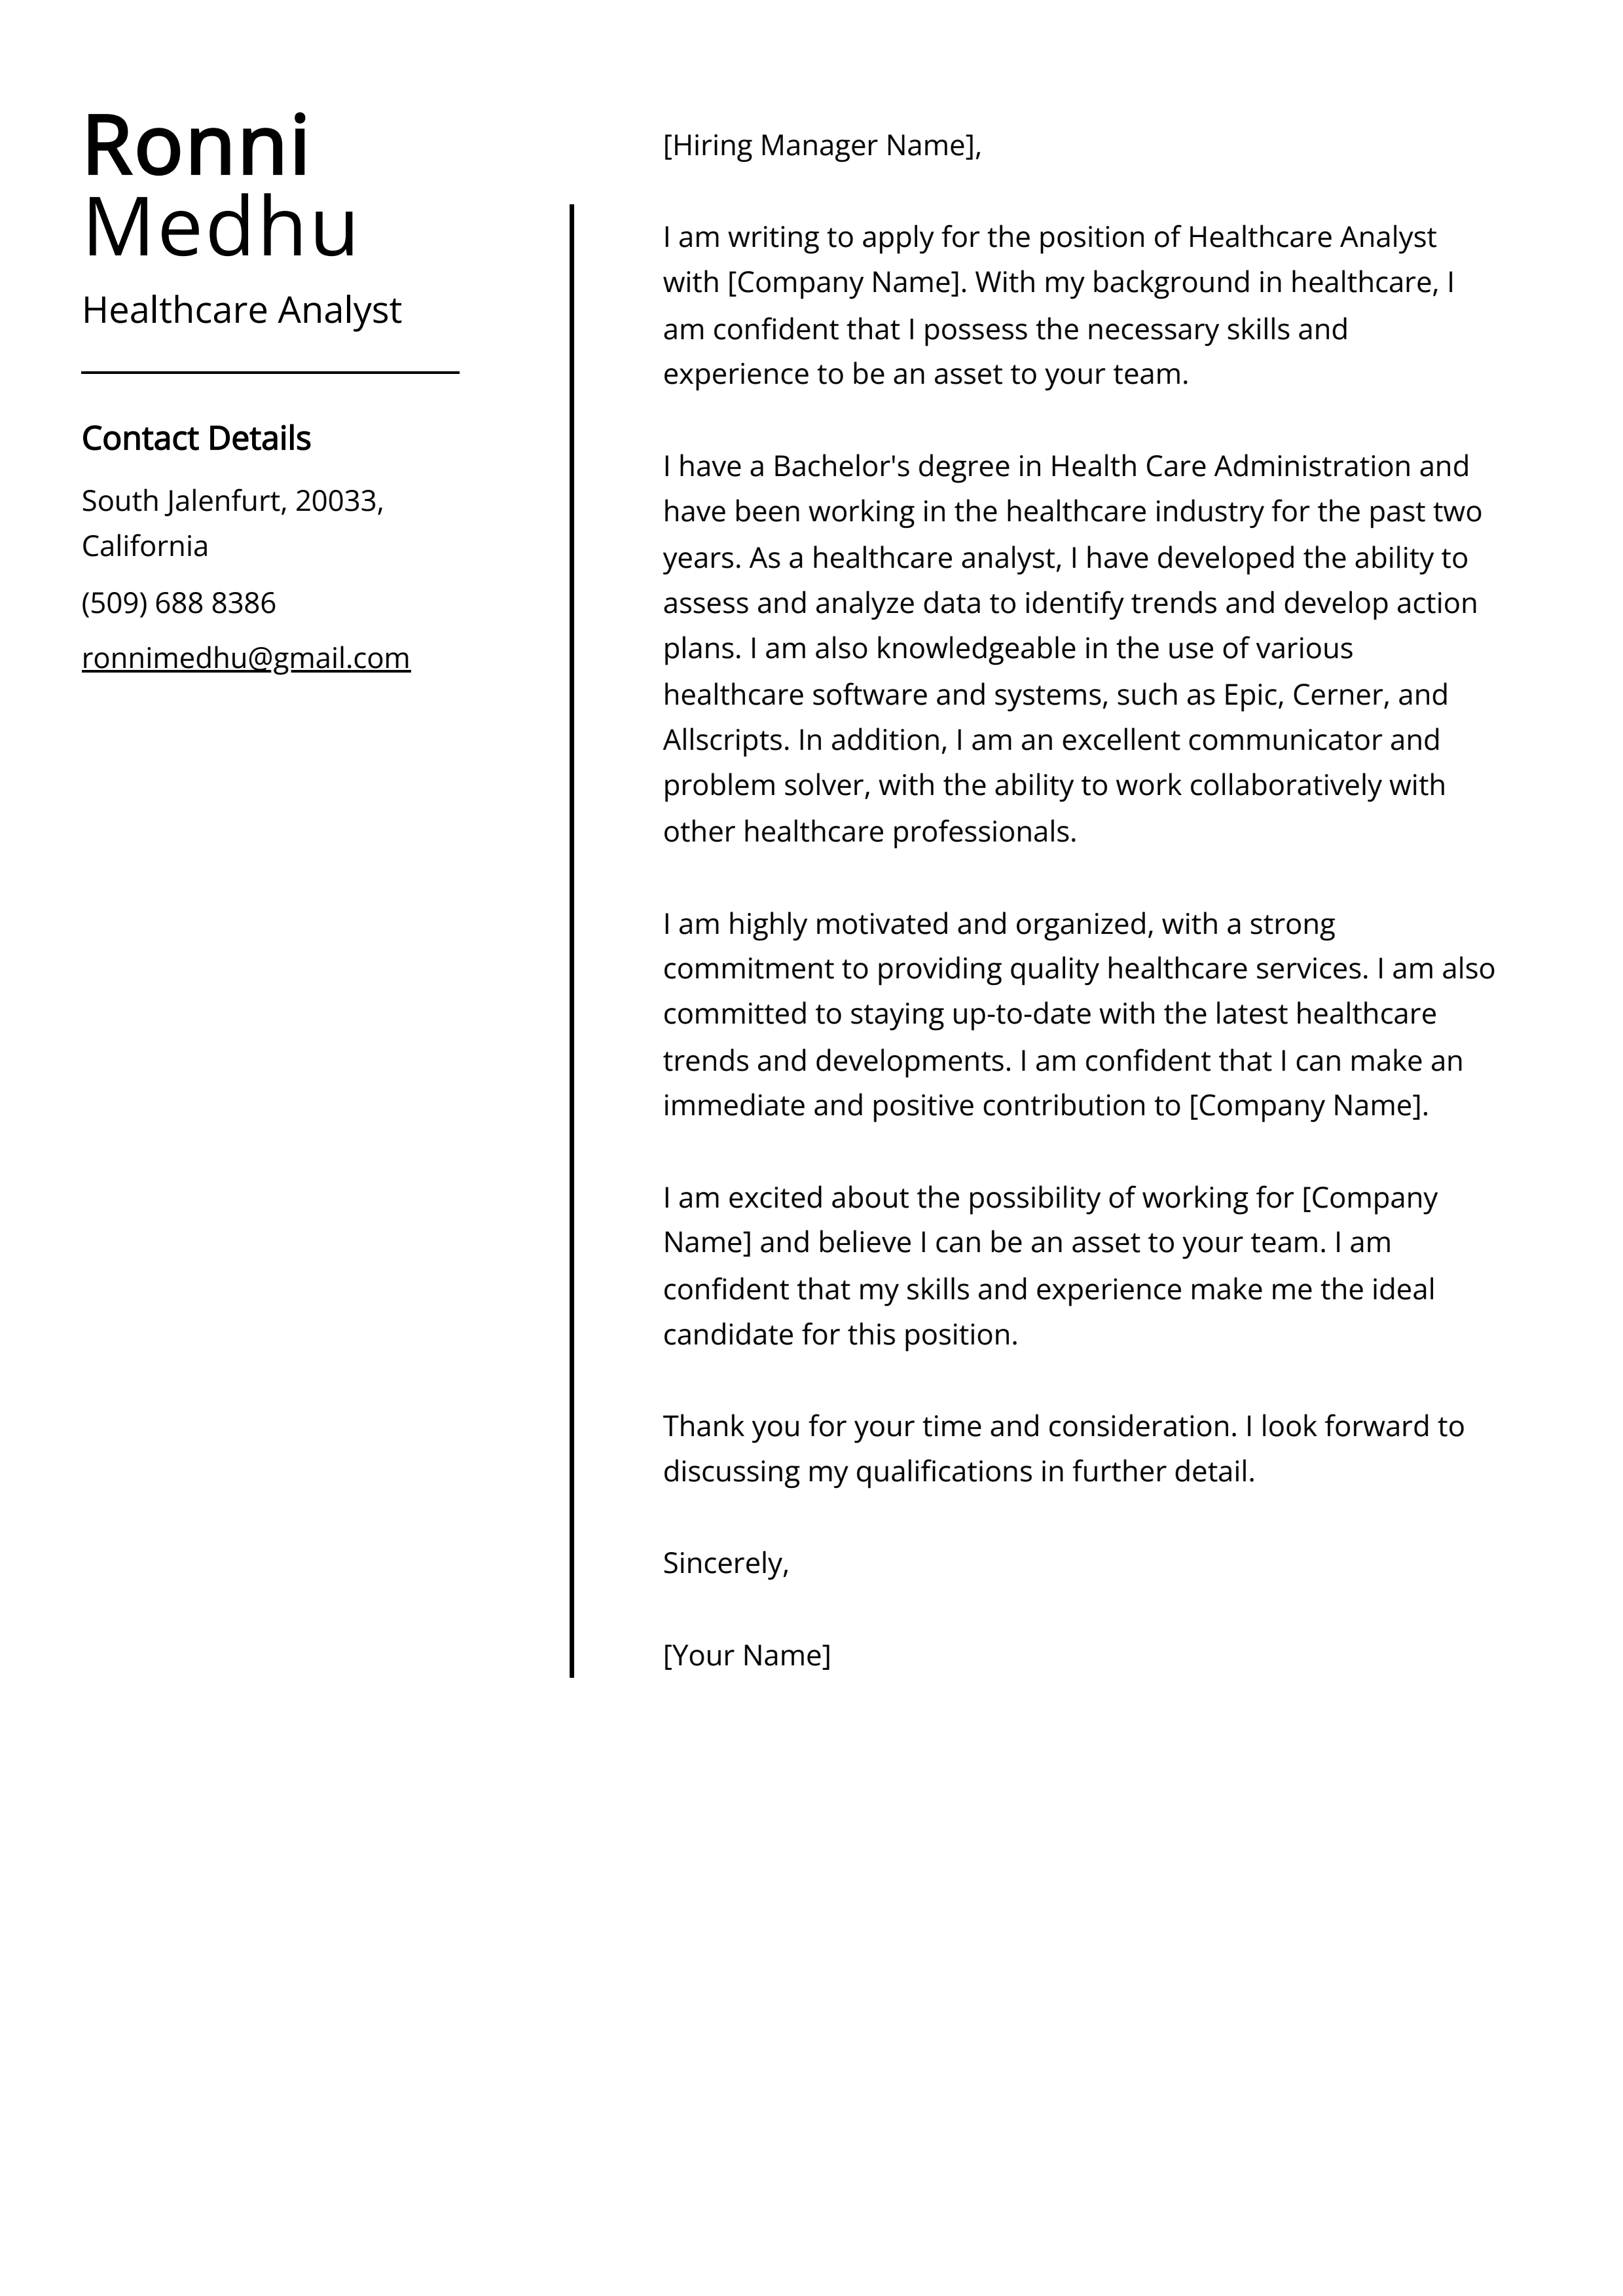 Healthcare Analyst Cover Letter Example